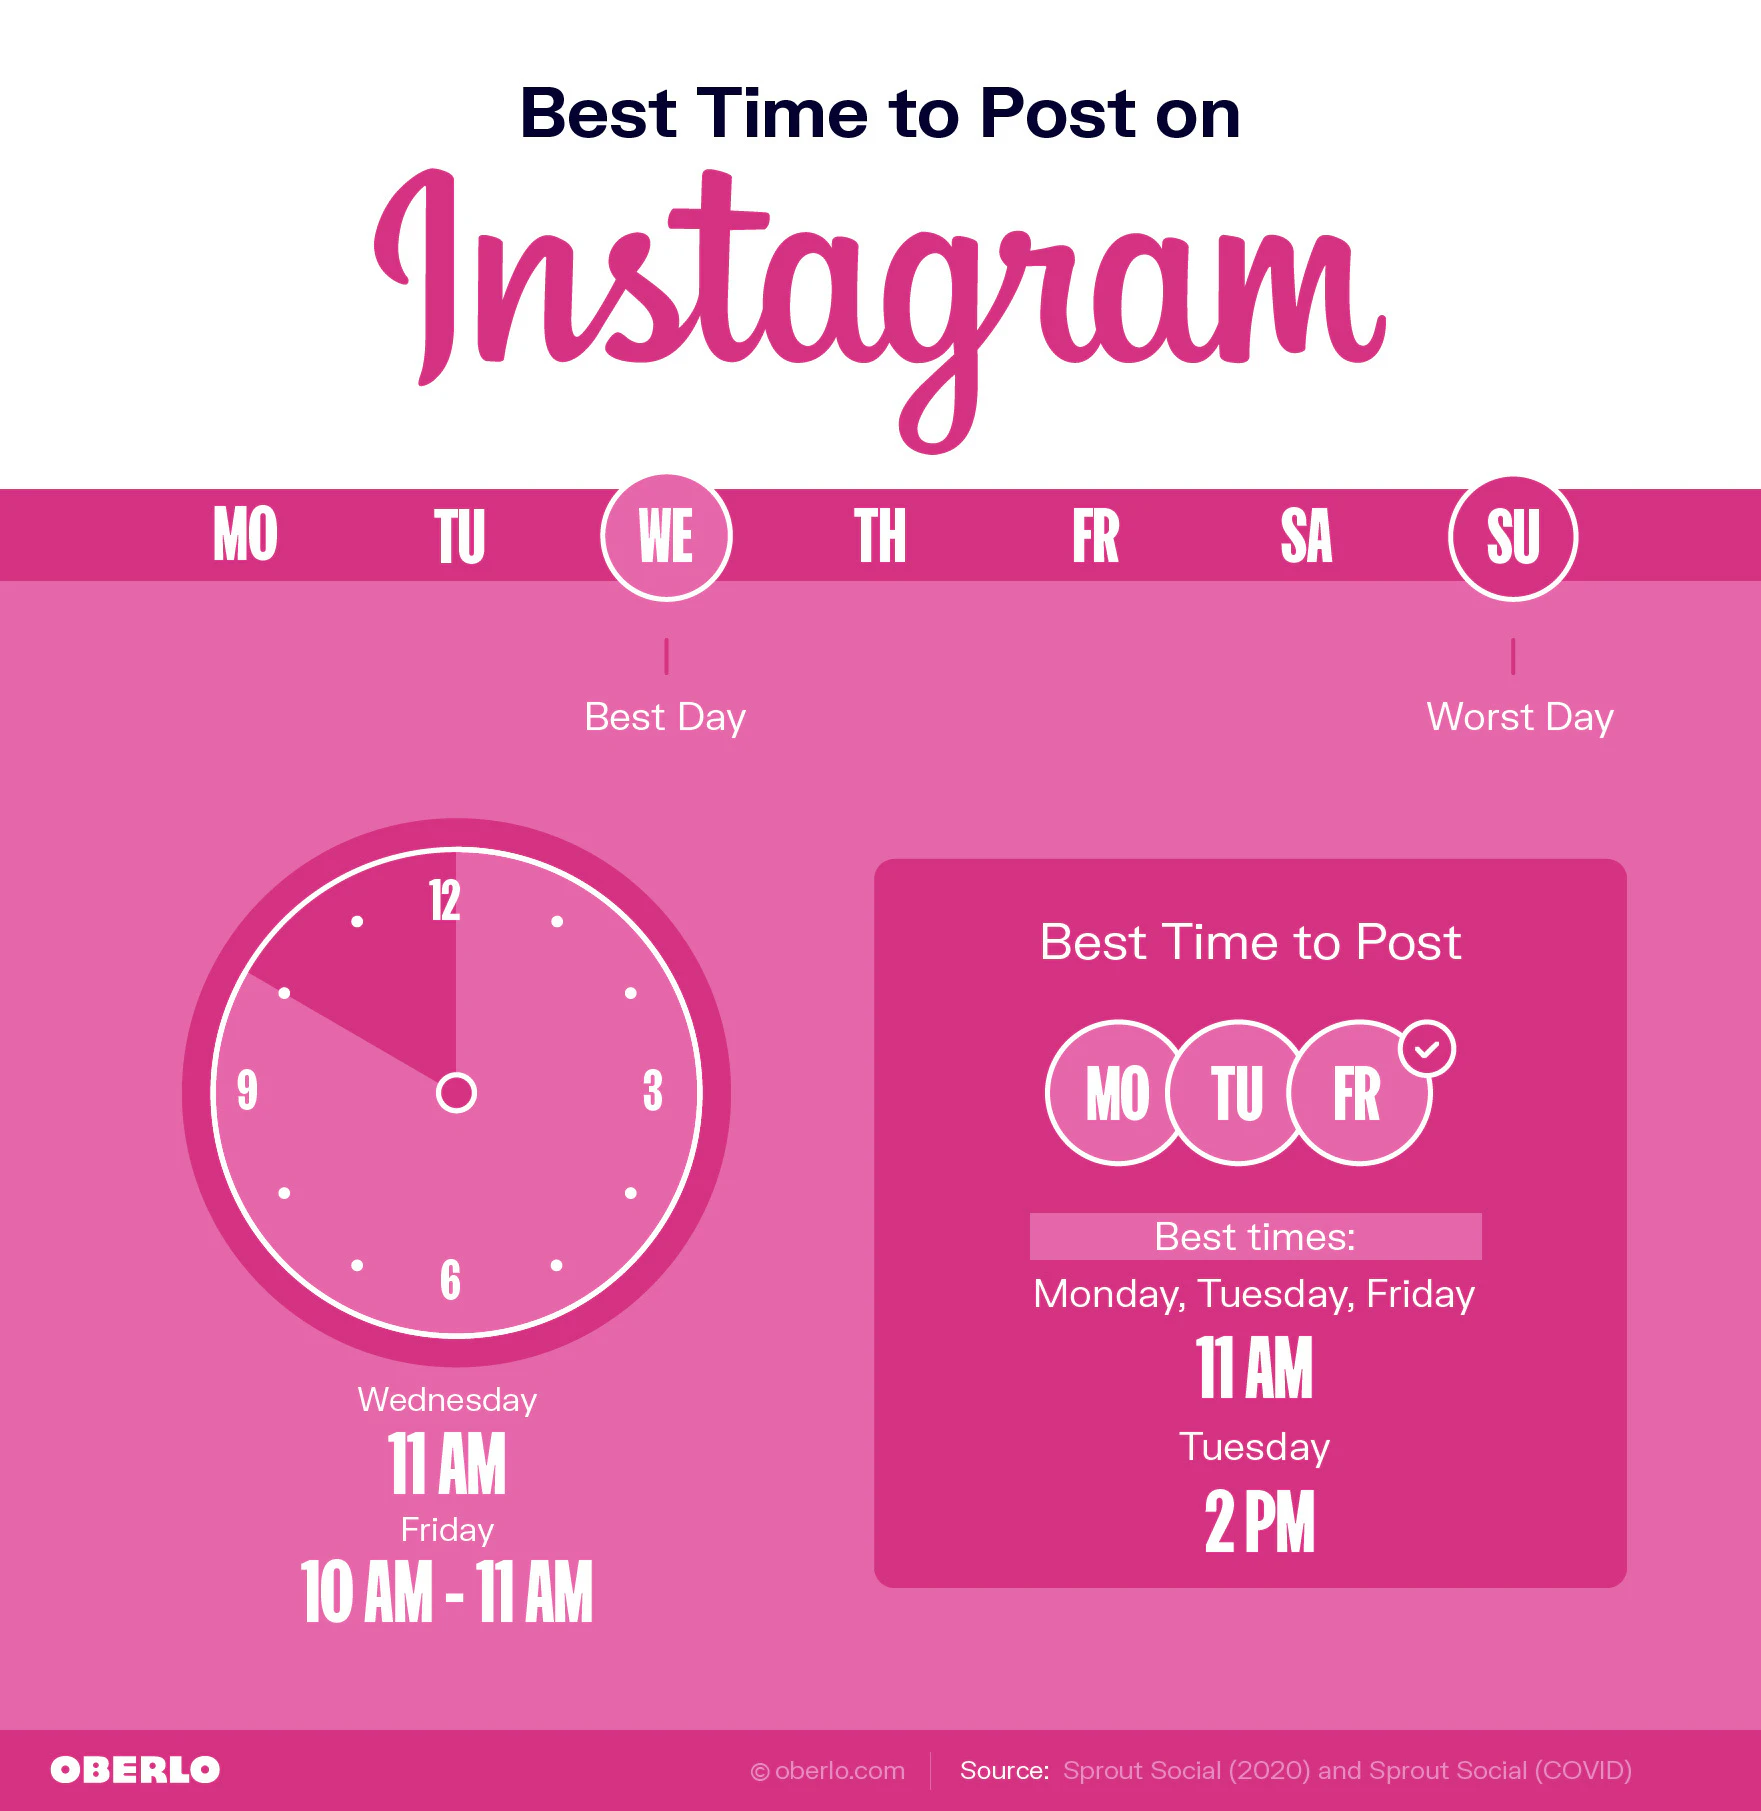 Best time to post on Instagram during the lockdown